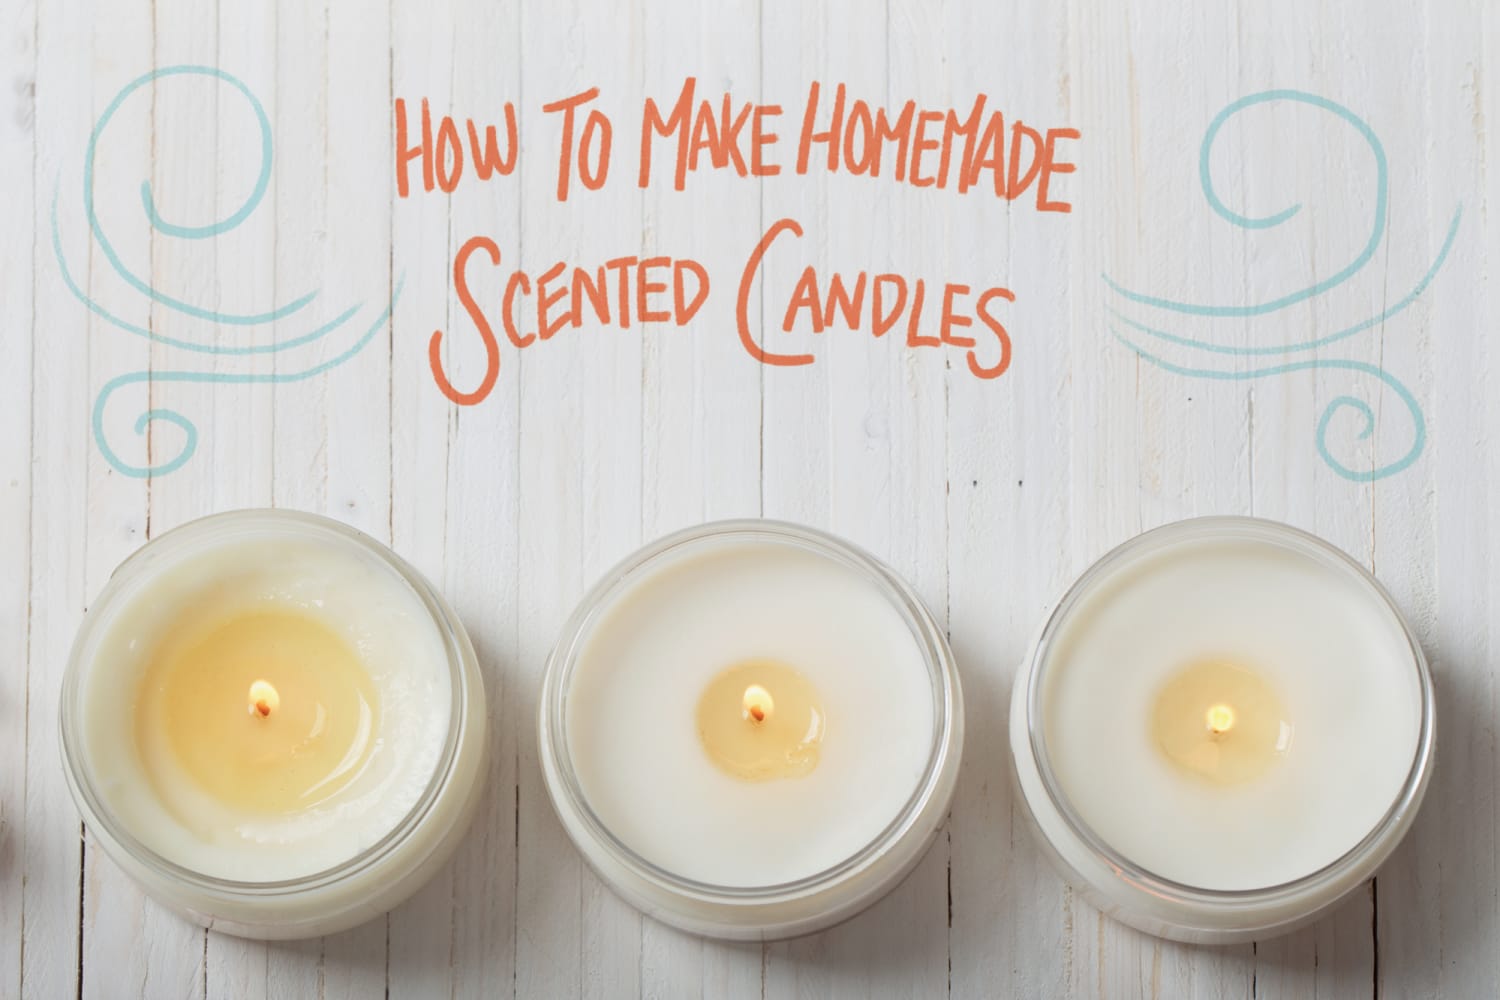 How To Make Homemade Scented Candles Apartment Therapy 0504